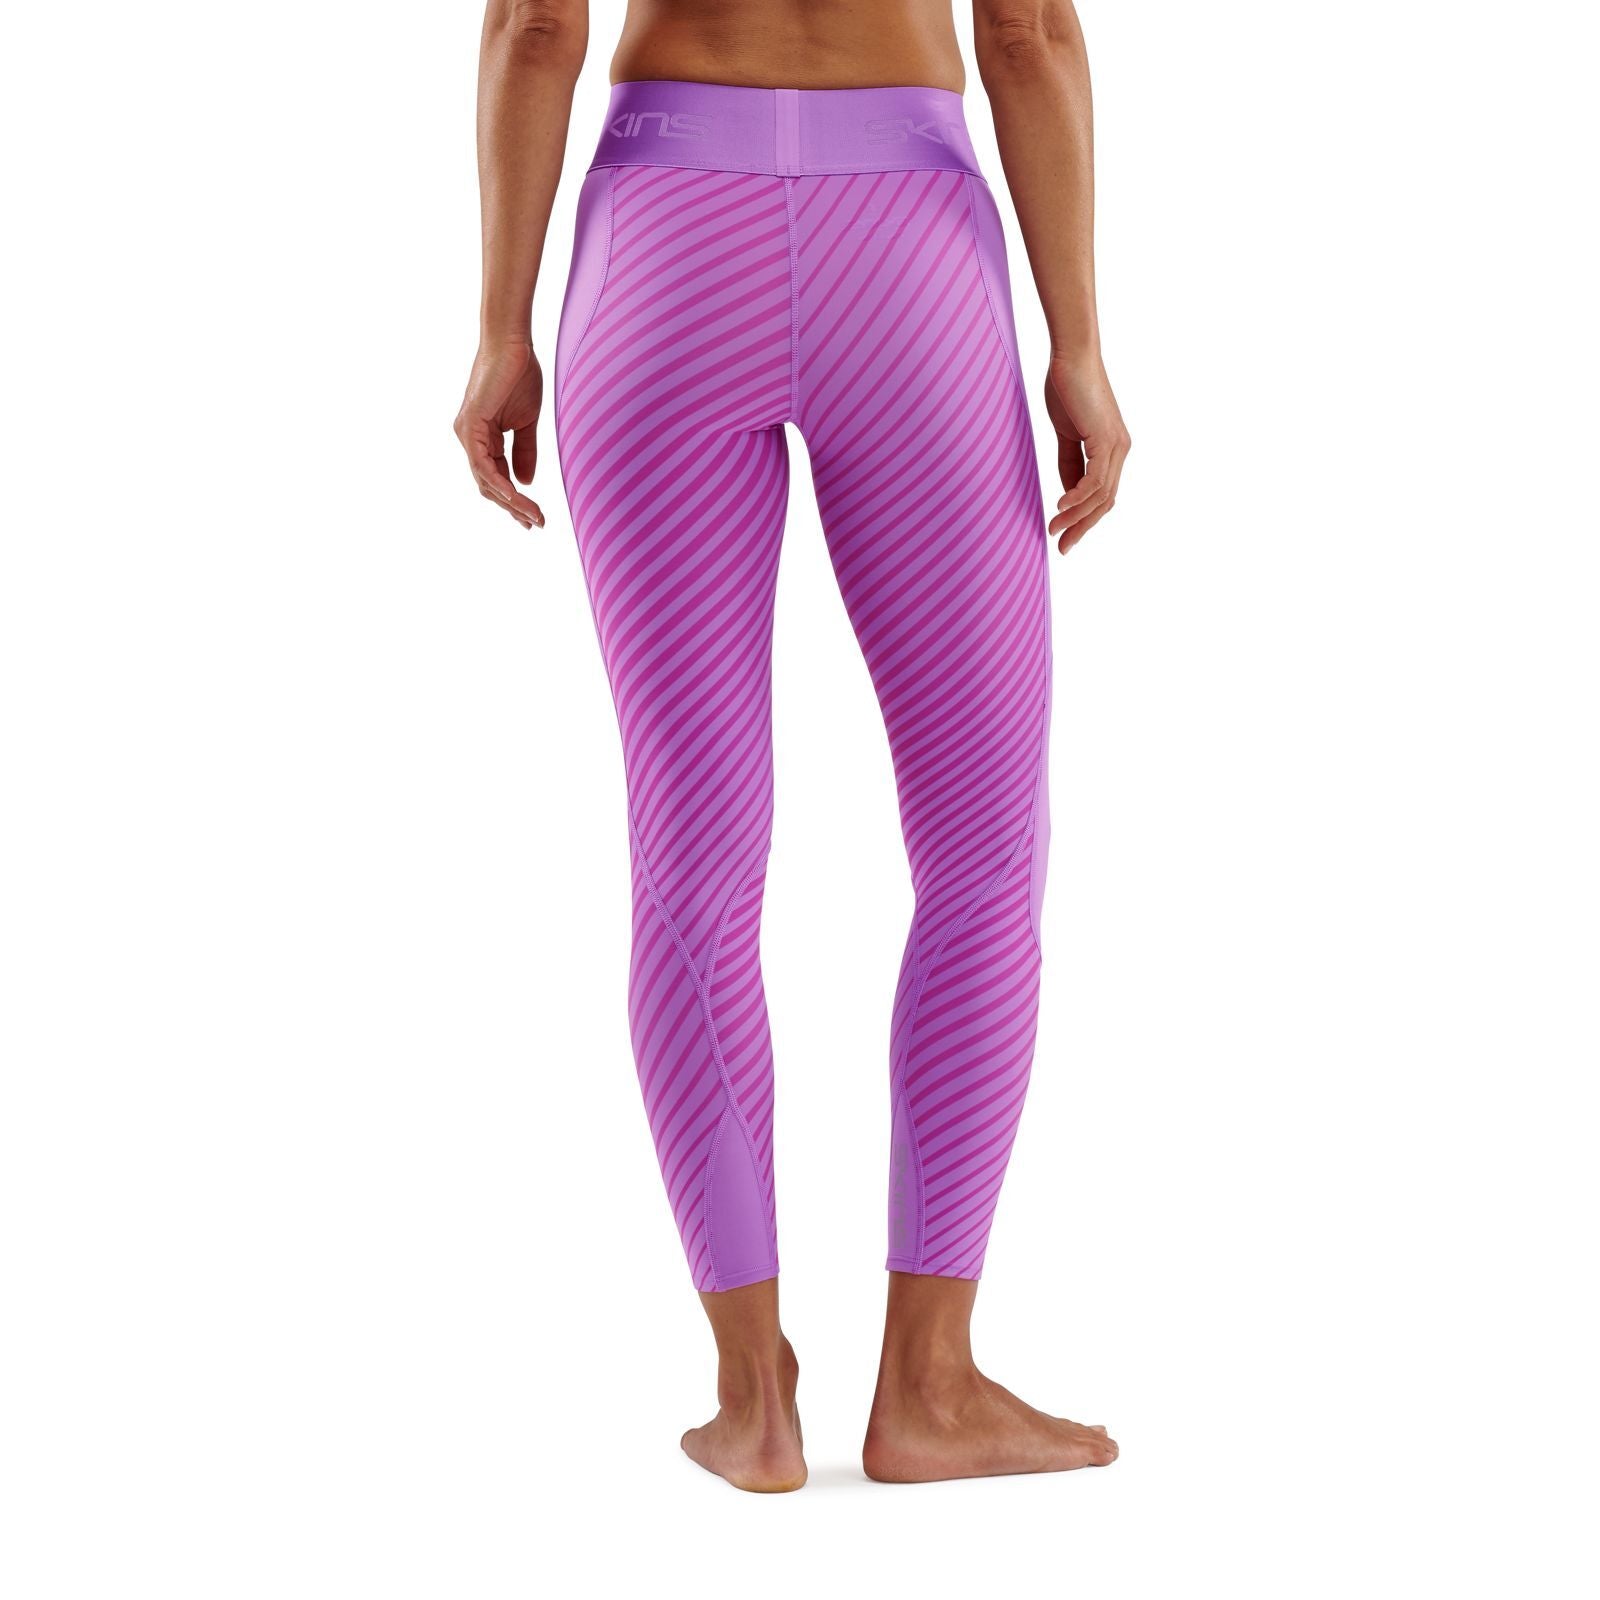 SKINS SERIES-3 Women's 7/8 Tights Linear Hot Pink